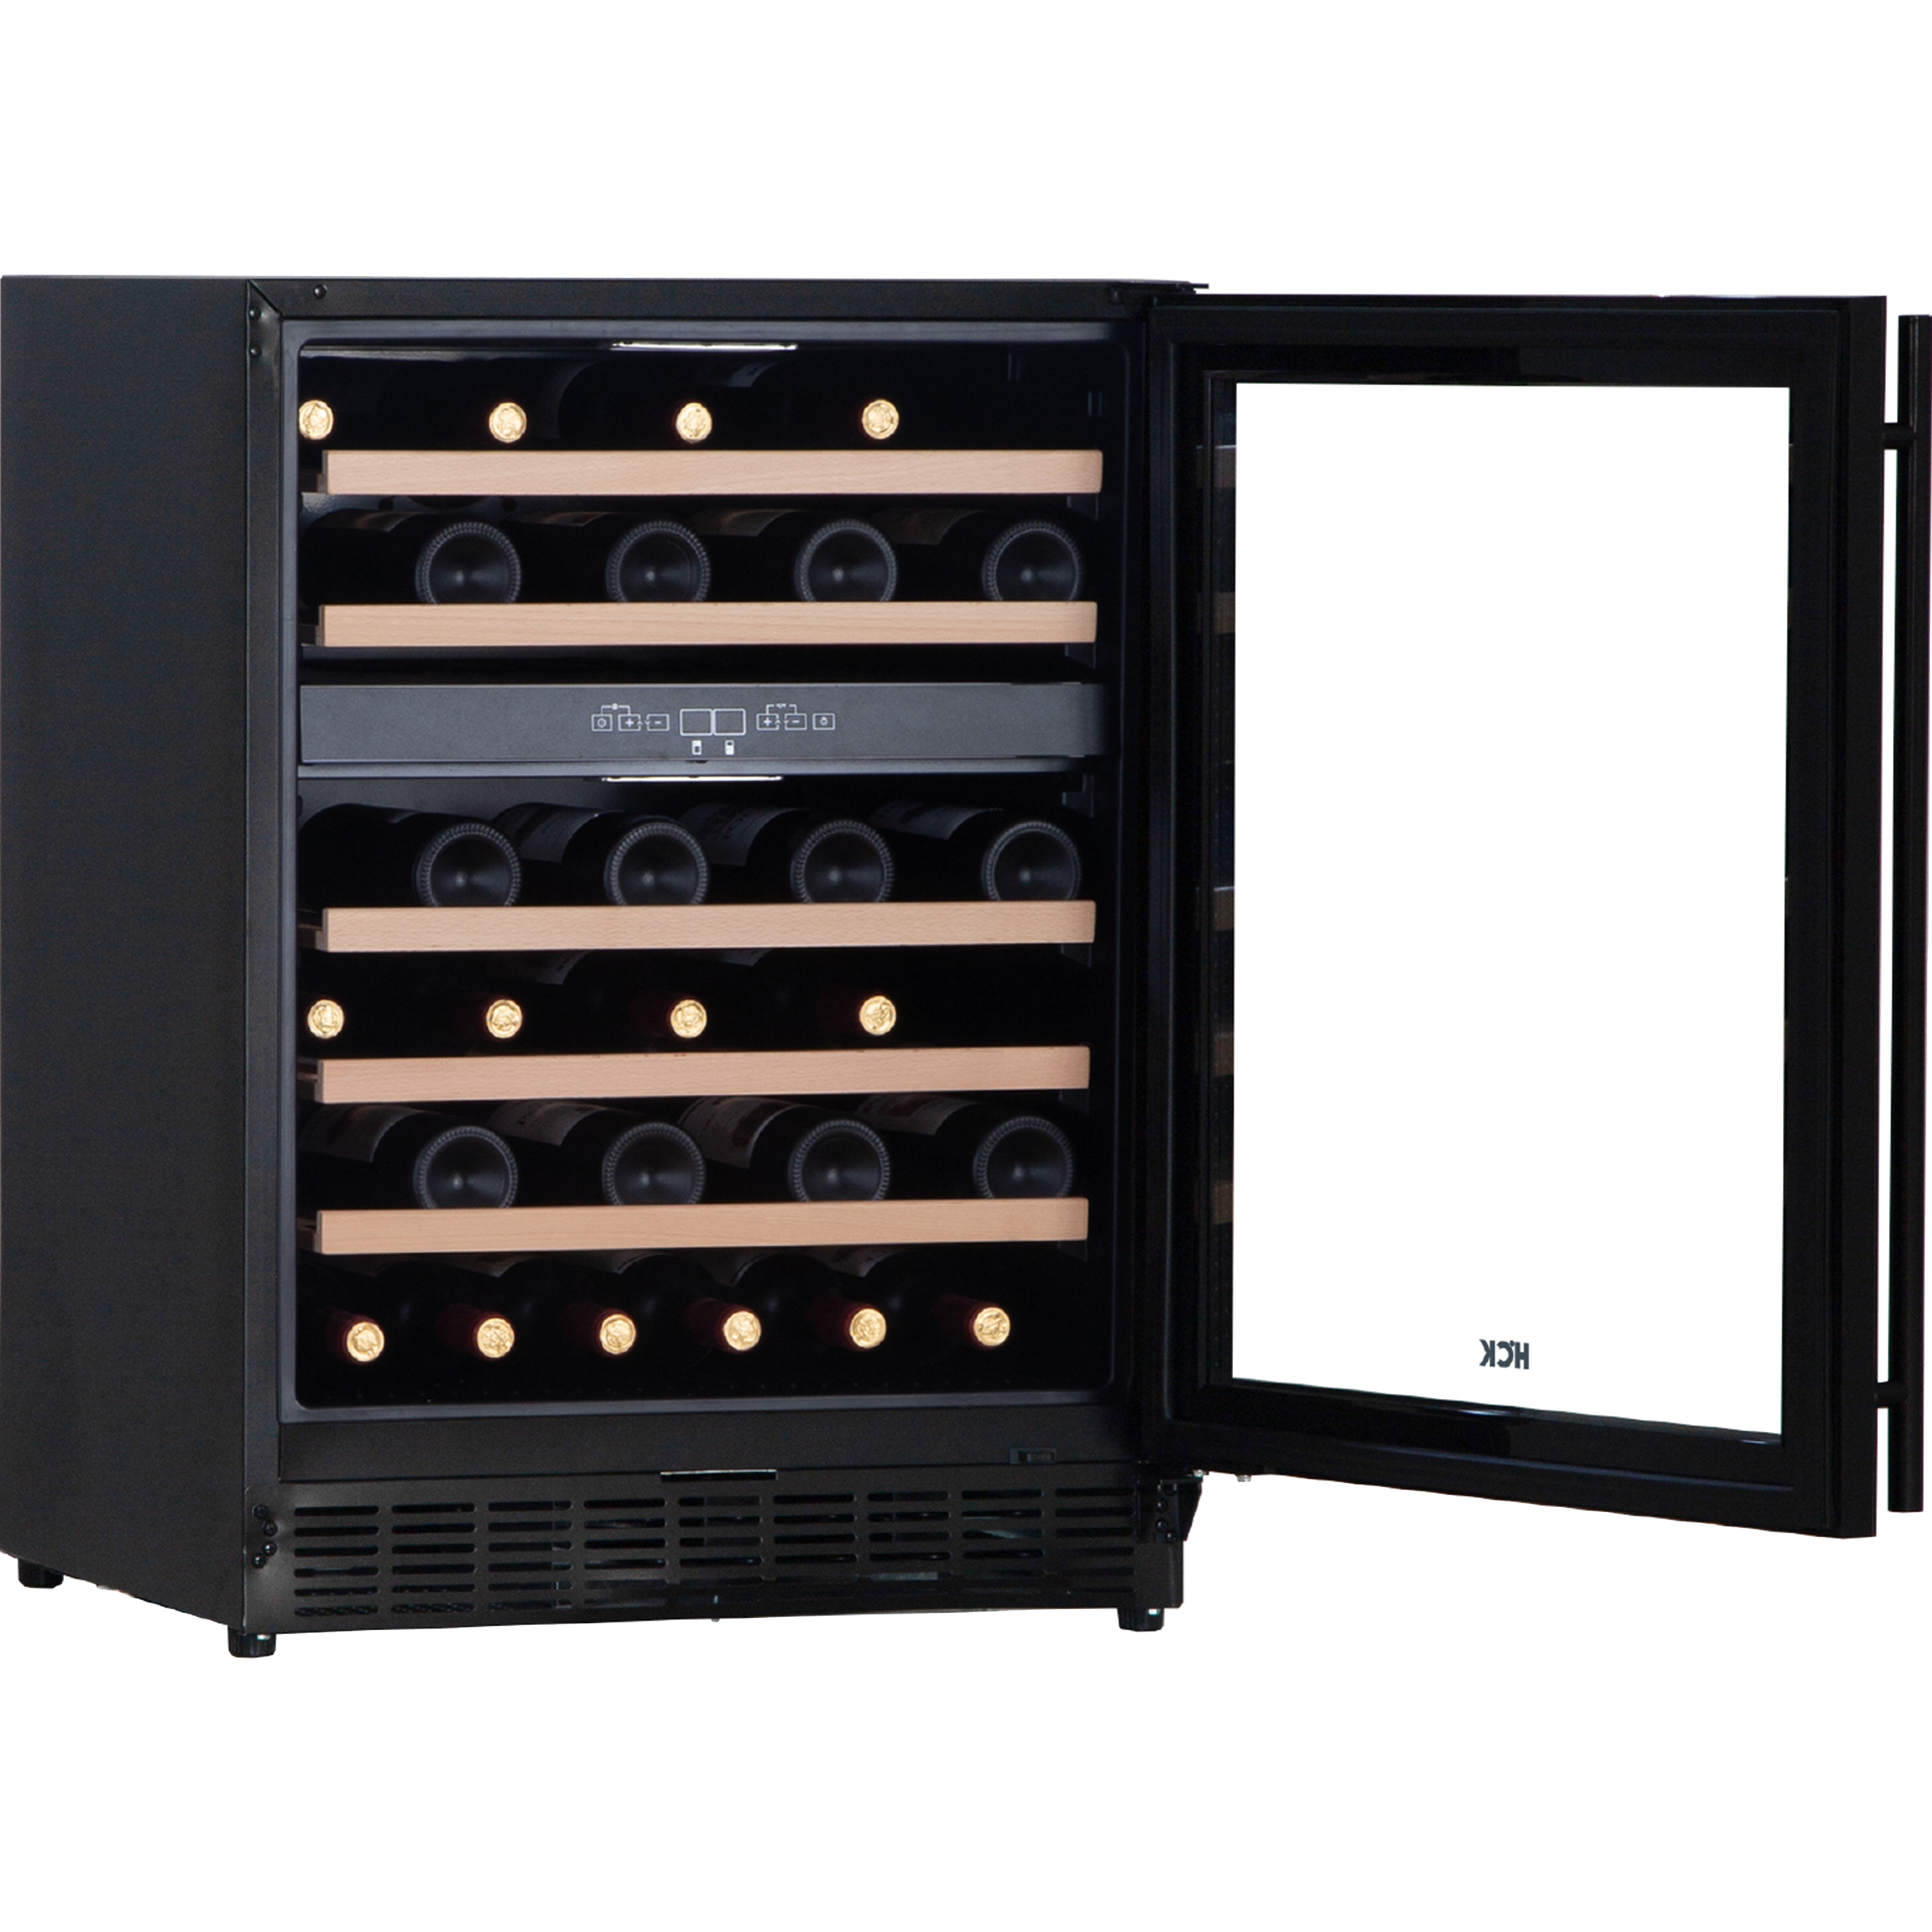 Side view of a 4.5 Cu Ft Black Dual Zone Wine Fridge 46 bottles, featuring 5 wooden shelves, a digital temperature control panel. The fridge is fully stocked with wine bottles.